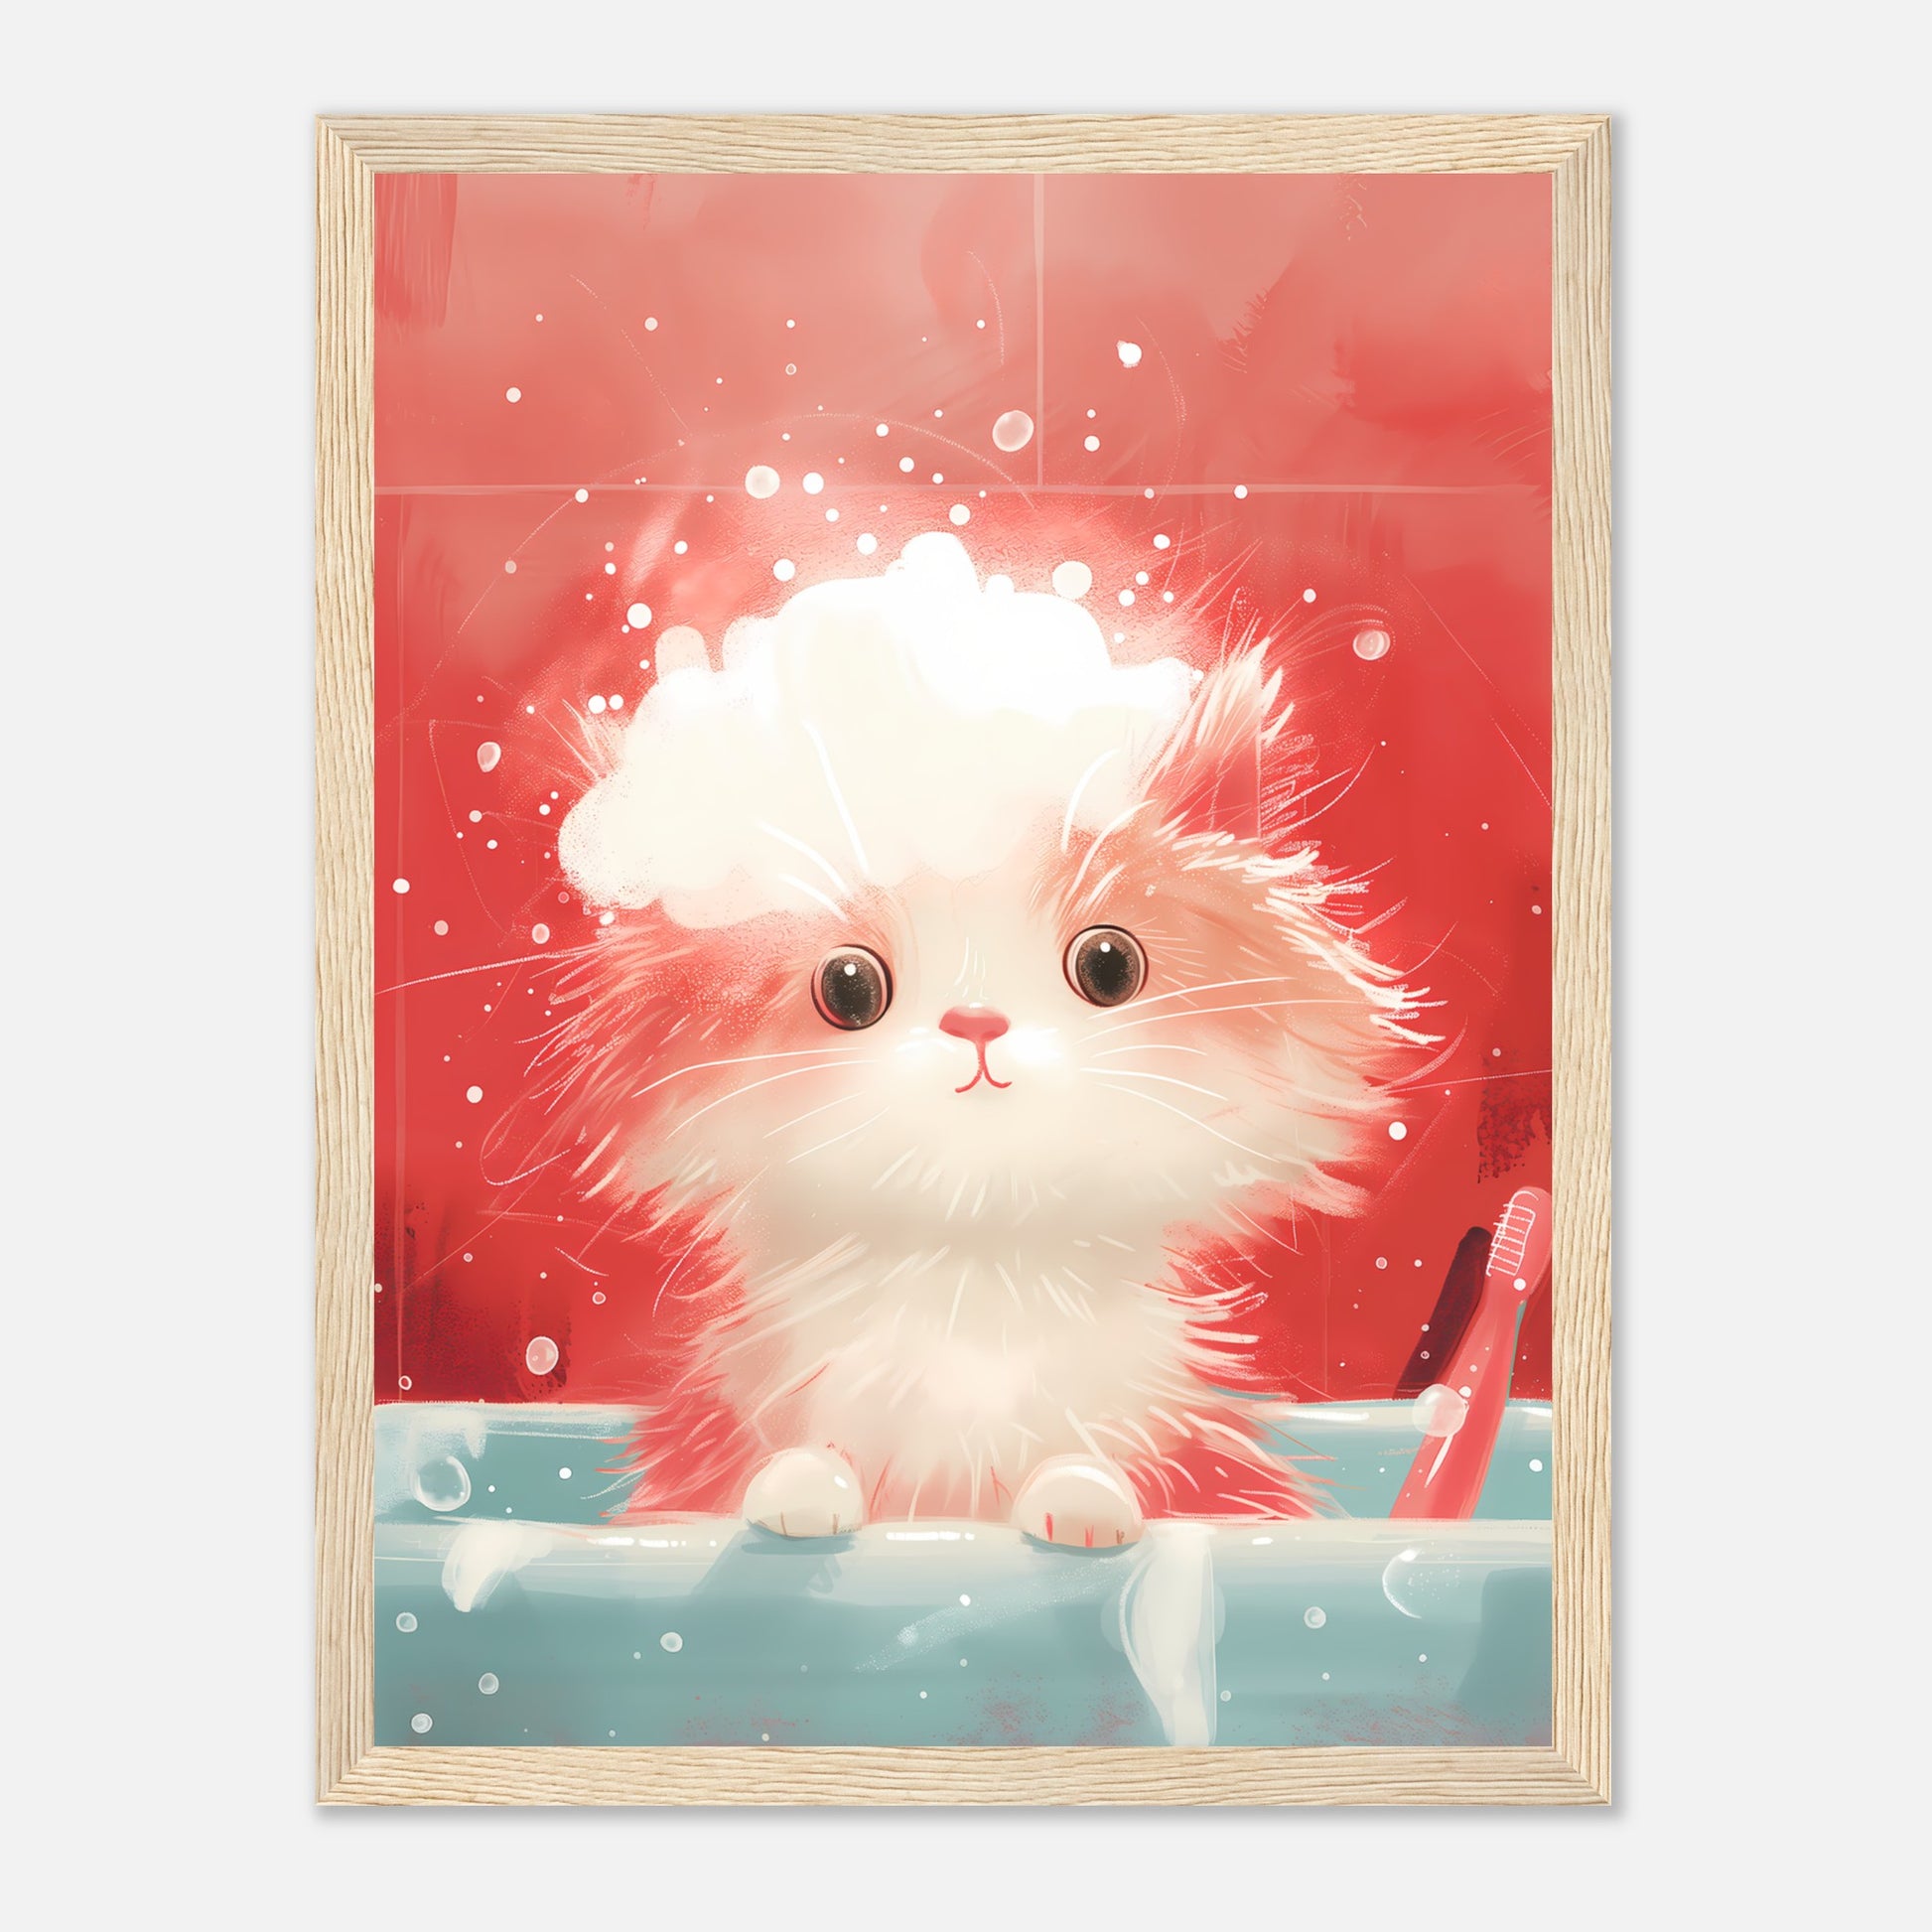 Illustration of a fluffy kitten with wide eyes peeking over a sink's edge.